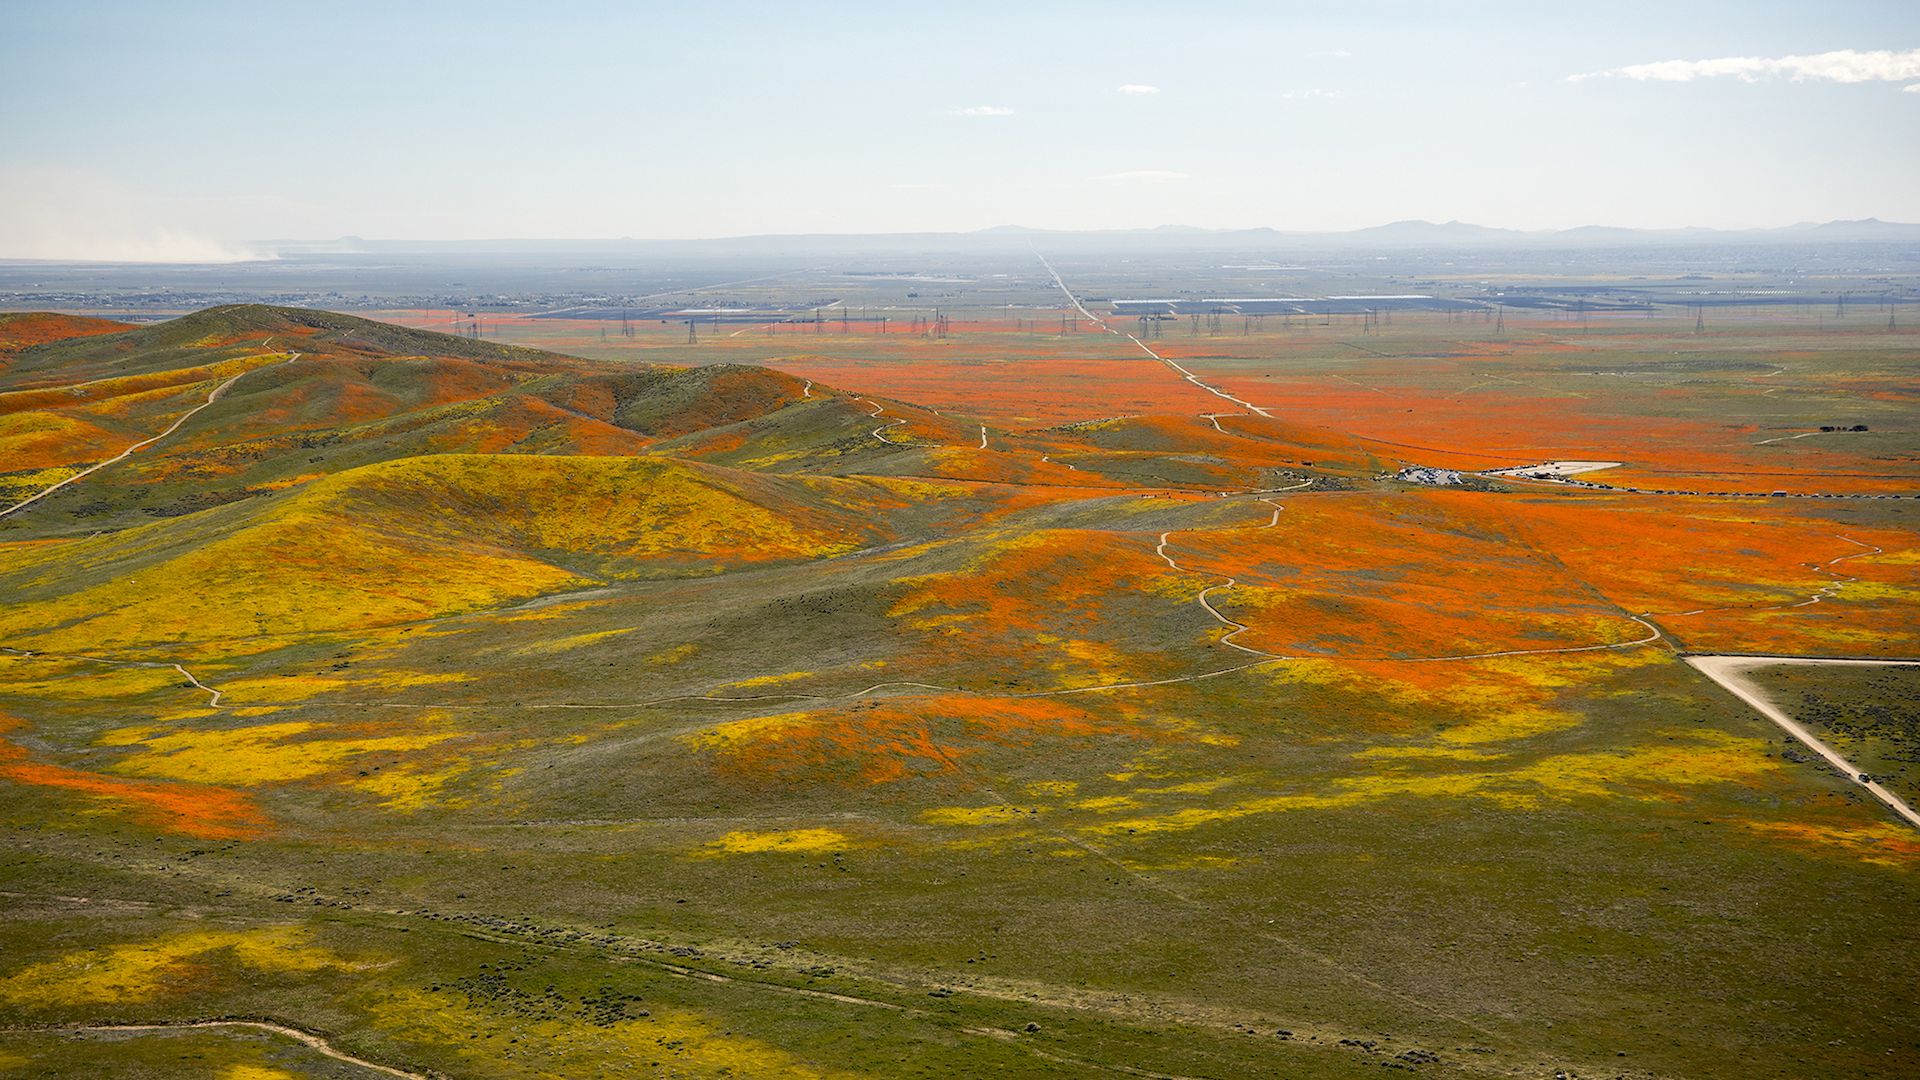 Aerial photo of the so-called "Super Bloom" of flowers in the California desert in 2019.